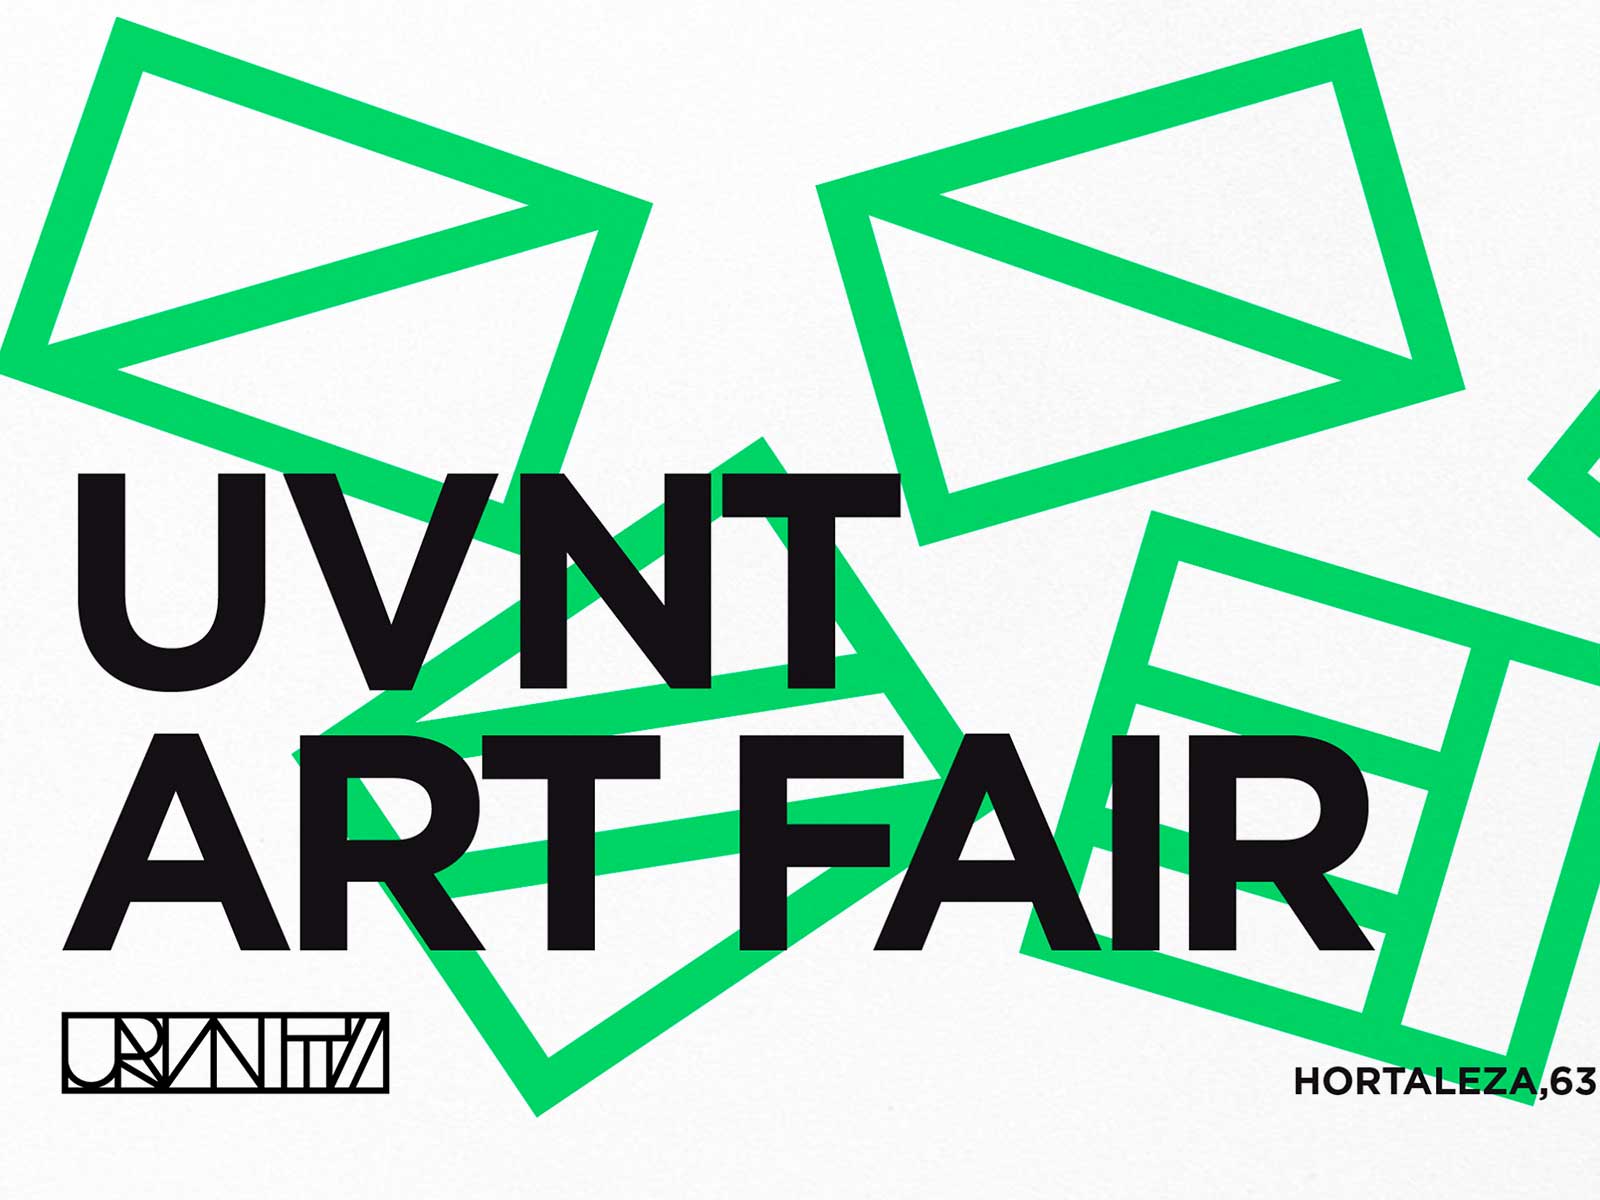 UVNT ART FAIR: Taking to the streets with art